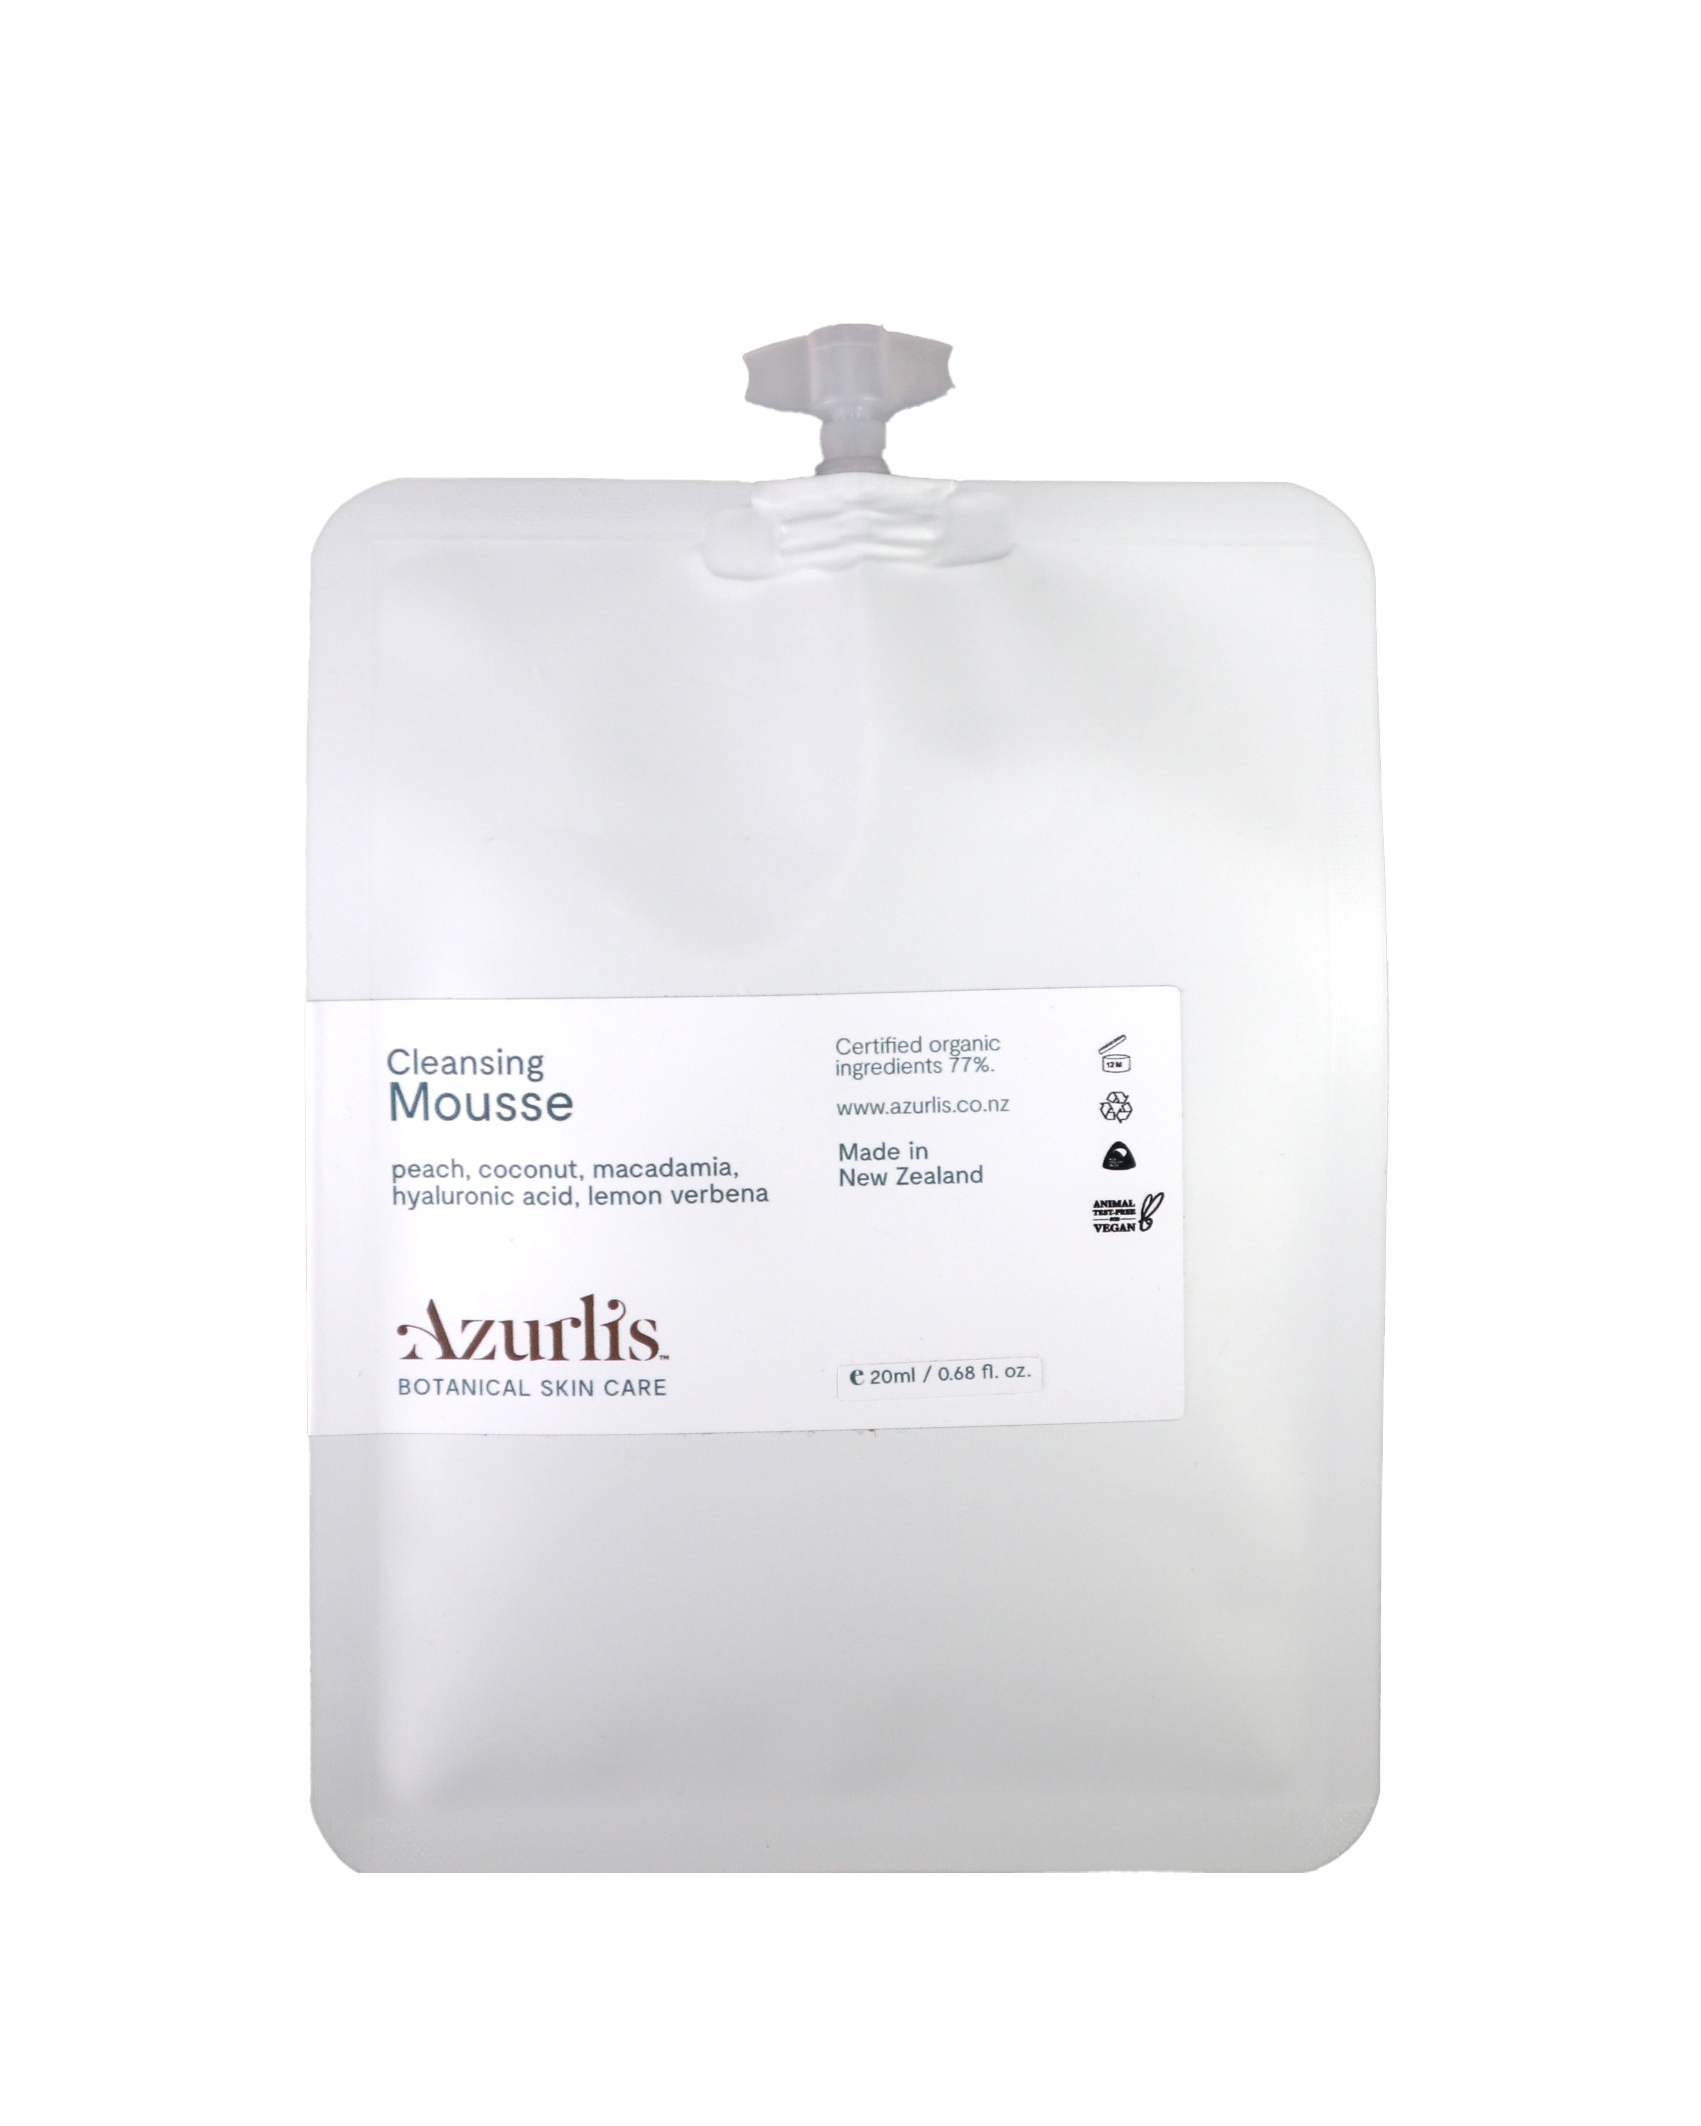 Azurlis™ Cleansing Mousse 100ml is a fantastic cleanser. Combining the benefits of a gentle cream cleanser with a good percentage of natural coconut surfactant and a wonderful scent due to the presence of citrus essential oils.